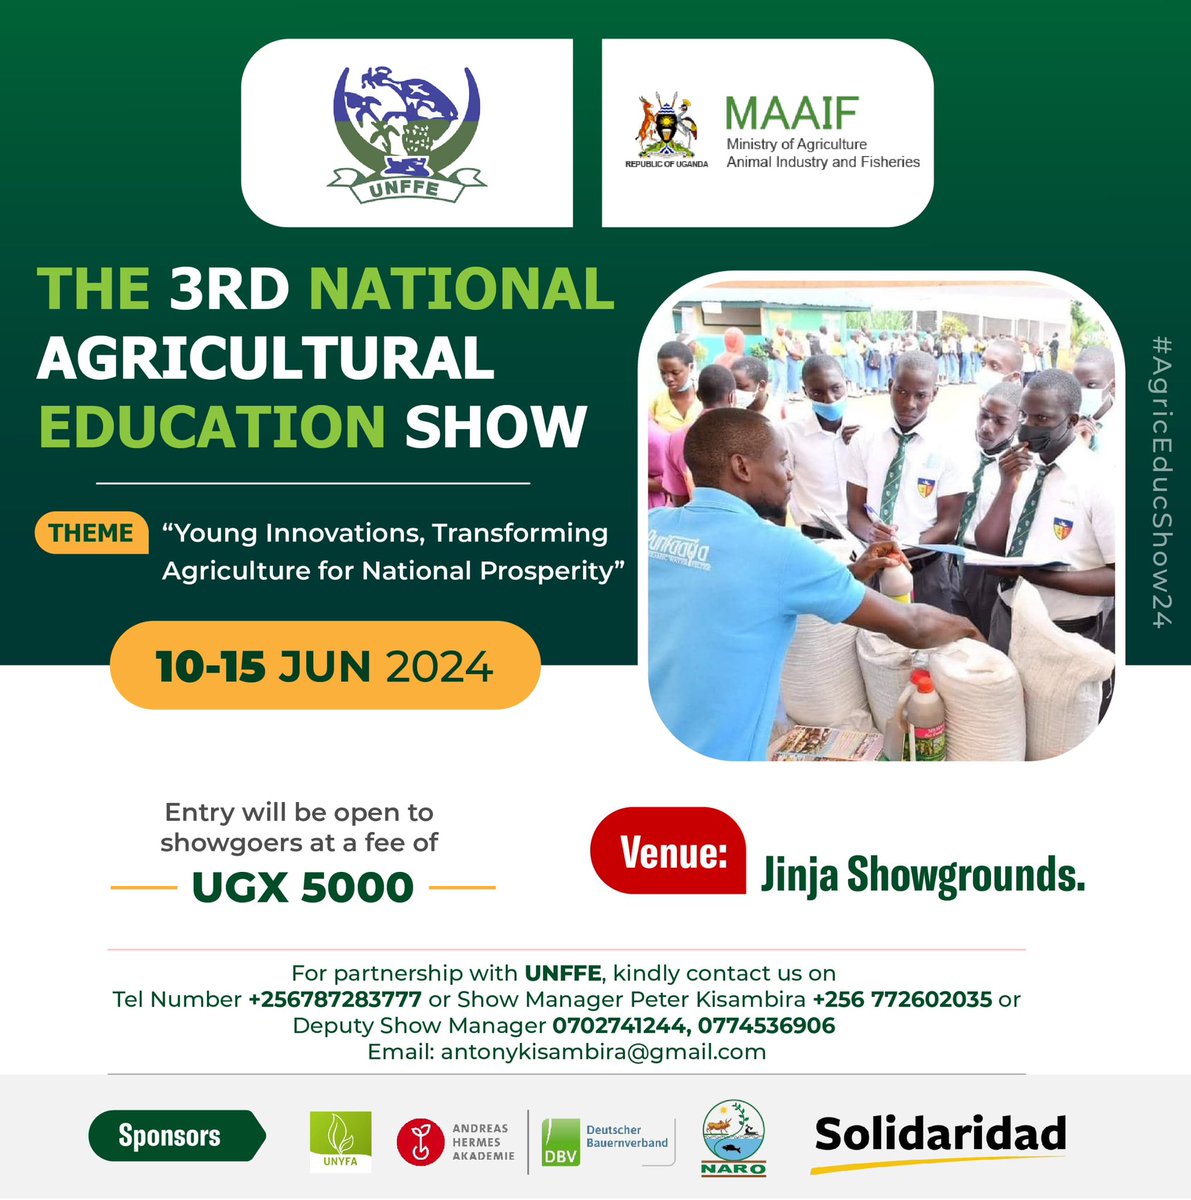 Absolutely no other event in the whole year #AgricEducShow24